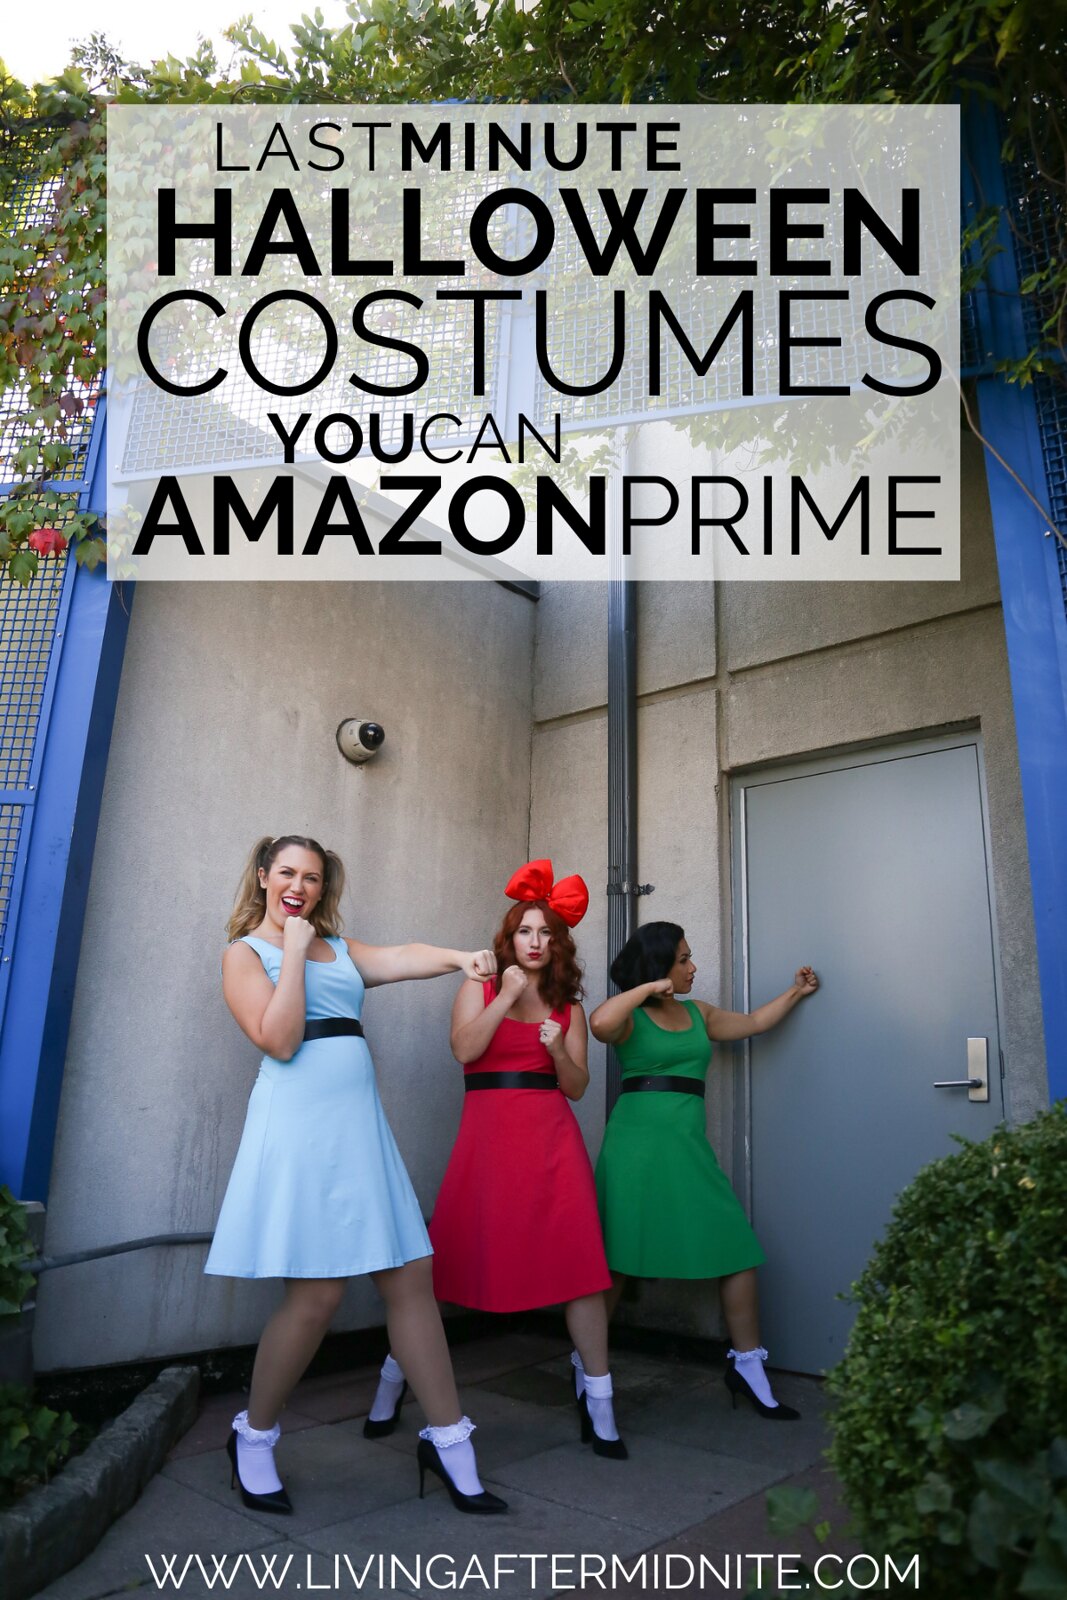 10 Last Minute Adult Halloween Costumes You Can Amazon Prime | The Best Last Minute Halloween Costume Ideas | What to be for Halloween | Adult Halloween Costumes